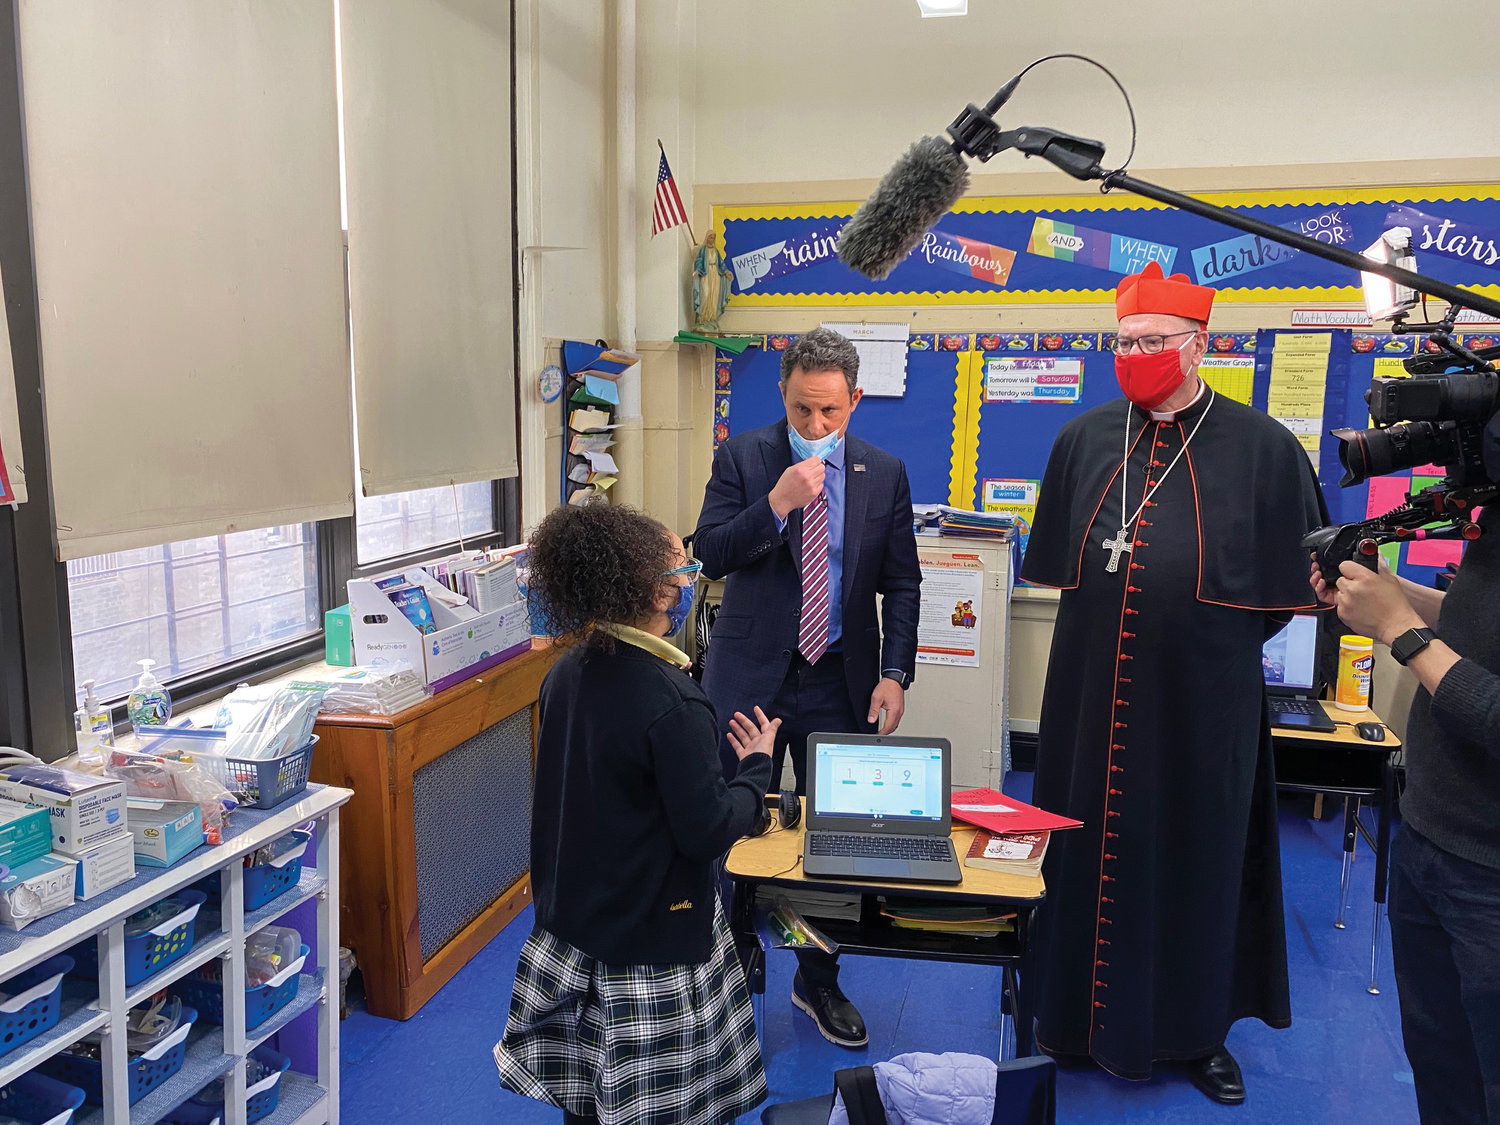 Second-grader Isabella Lluberes speaks with Brian Kilmeade, host of Fox & Friends, and Cardinal Dolan at Good Shepherd School in the Inwood section of Manhattan March 12. Fox & Friends, a national morning show on FOX News, aired a piece March 15 about Catholic schools’ success in safely reopening their doors last September.